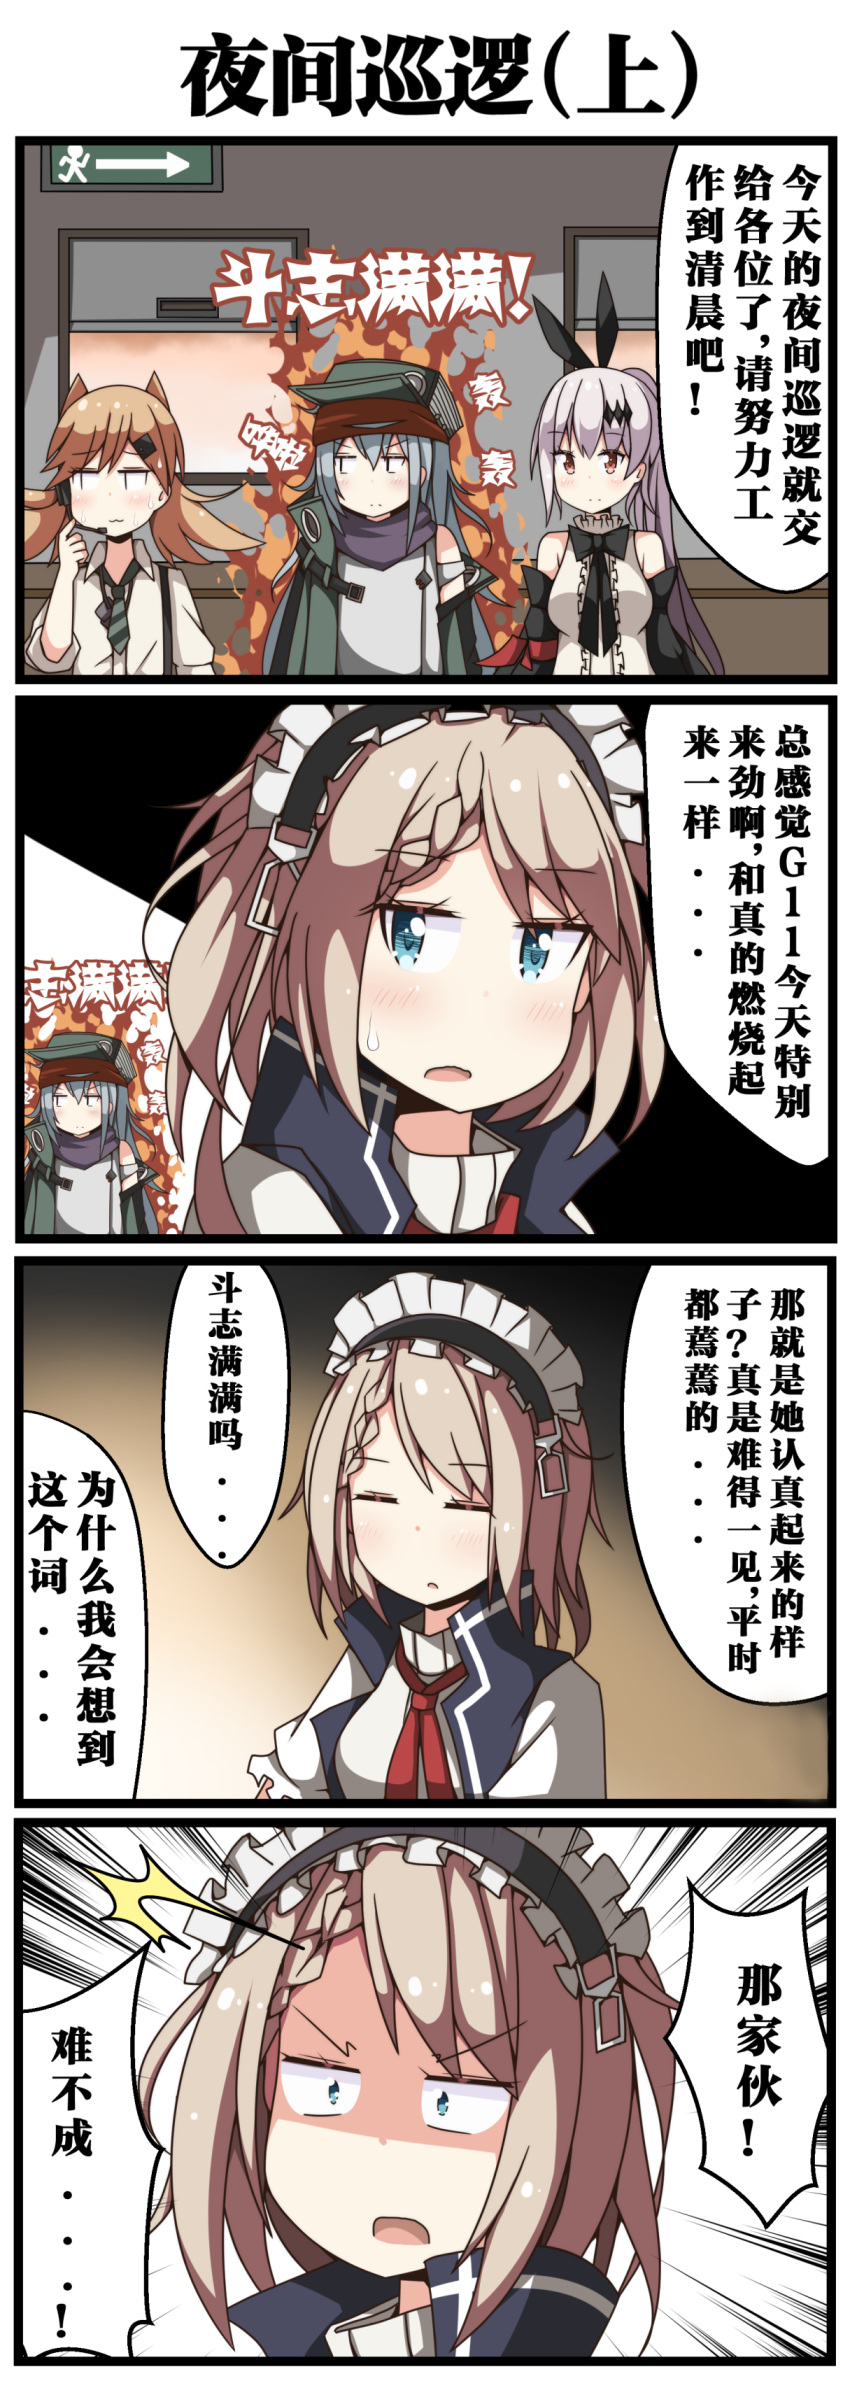 4girls 4koma absurdres ac130 blonde_hair braid comic commentary commentary_request fire five-seven_(girls_frontline) g11_(girls_frontline) g36_(girls_frontline) girls_frontline grey_hair highres idw_(girls_frontline) long_hair messy_hair multiple_girls ponytail translation_request wide-eyed